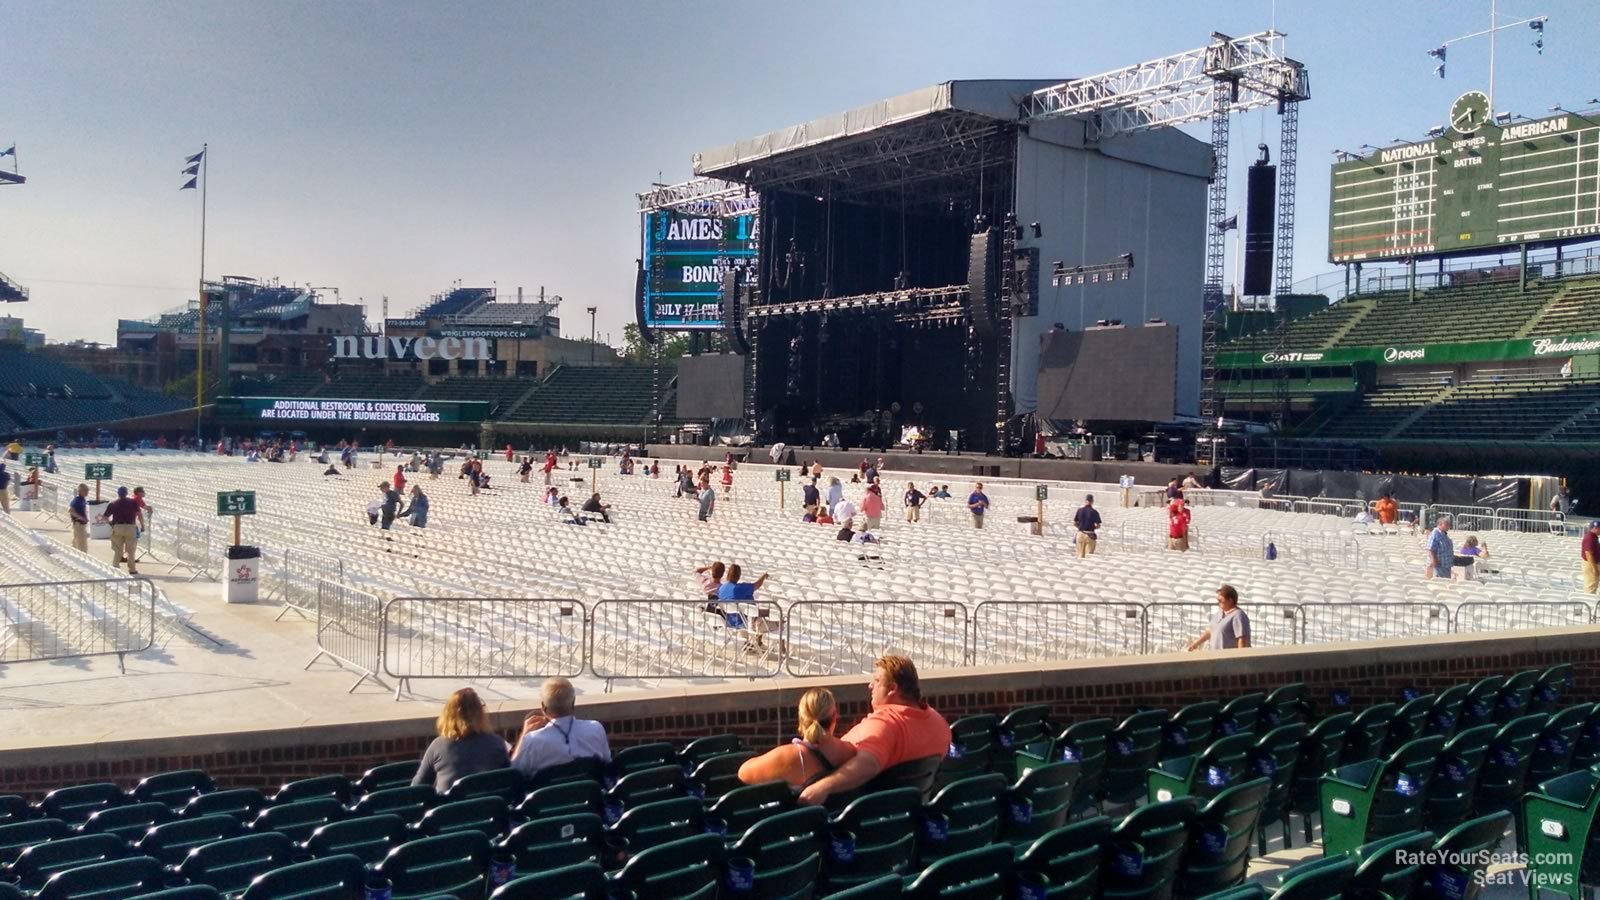 section 30, row 10 seat view  for concert - wrigley field